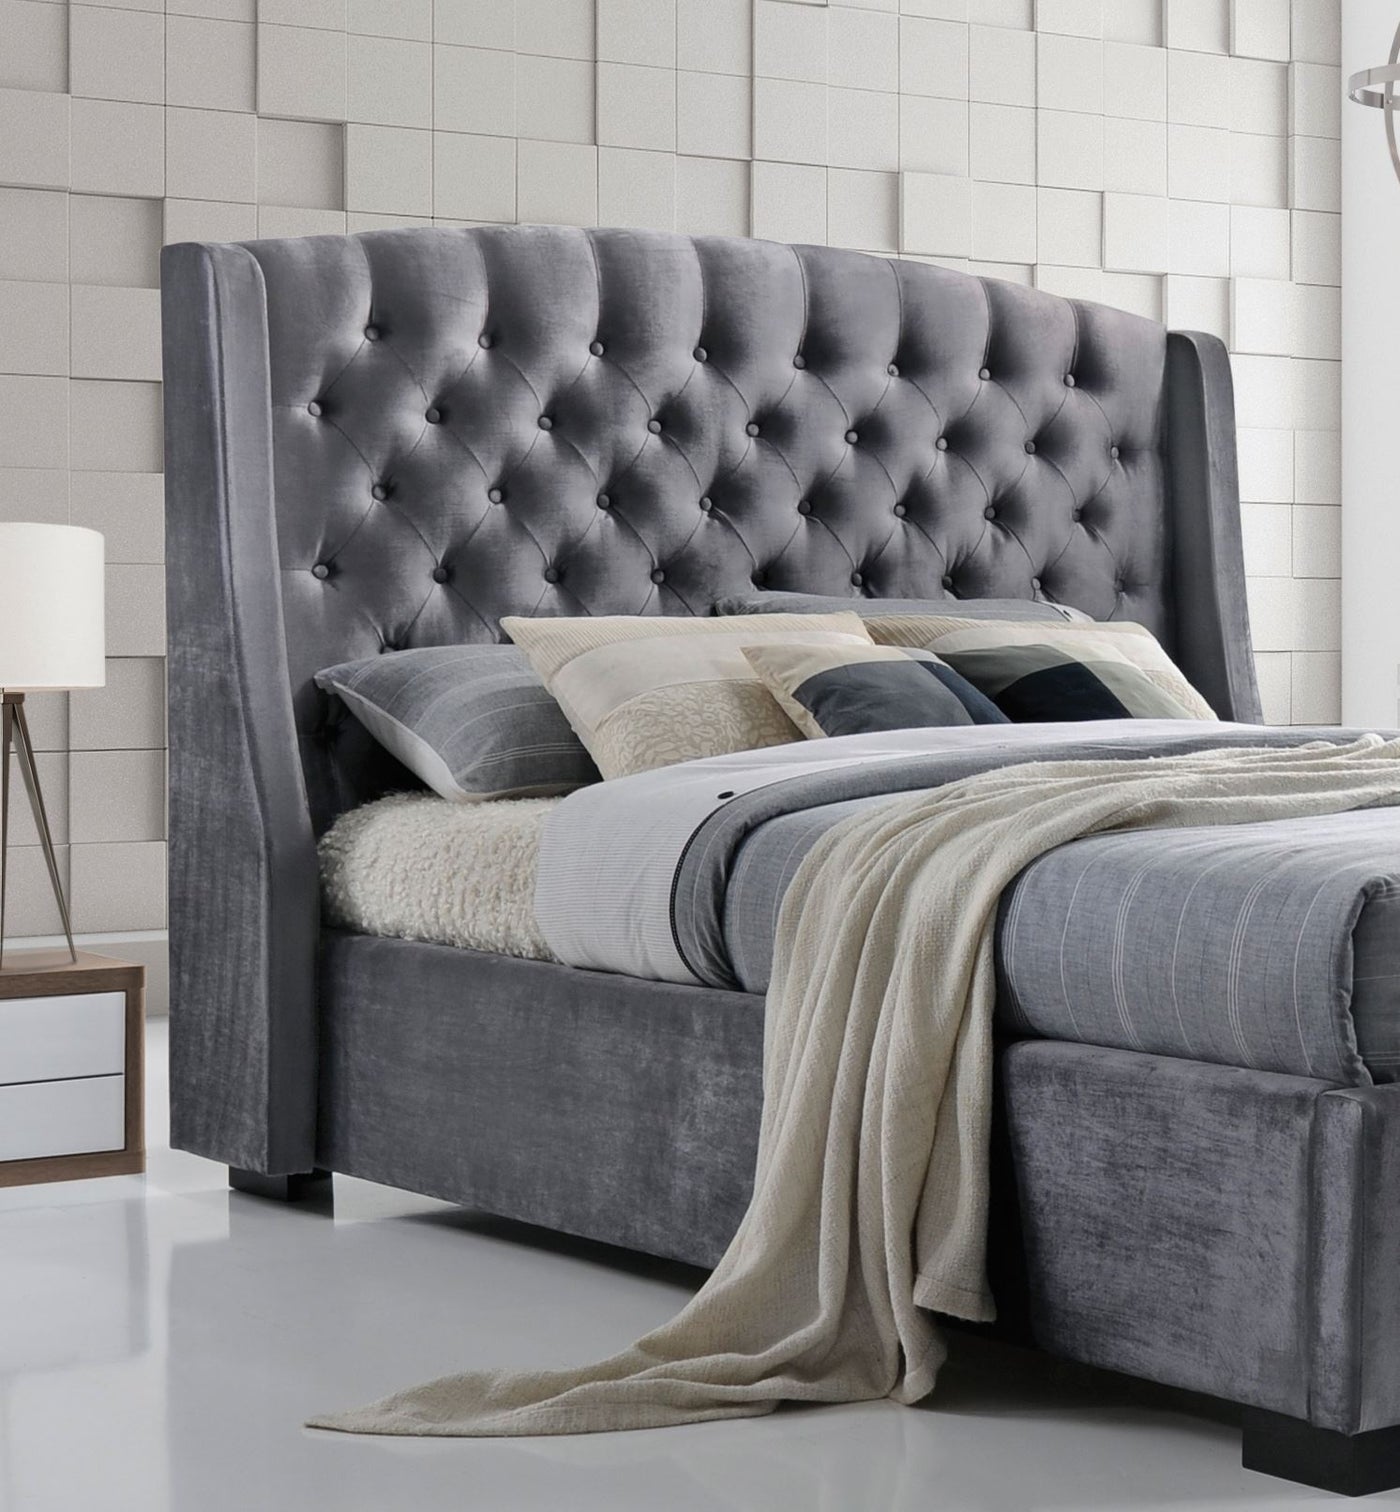 Salween Wing Style Luxury Tufted Upholstered  Bed Frame - Silver Grey